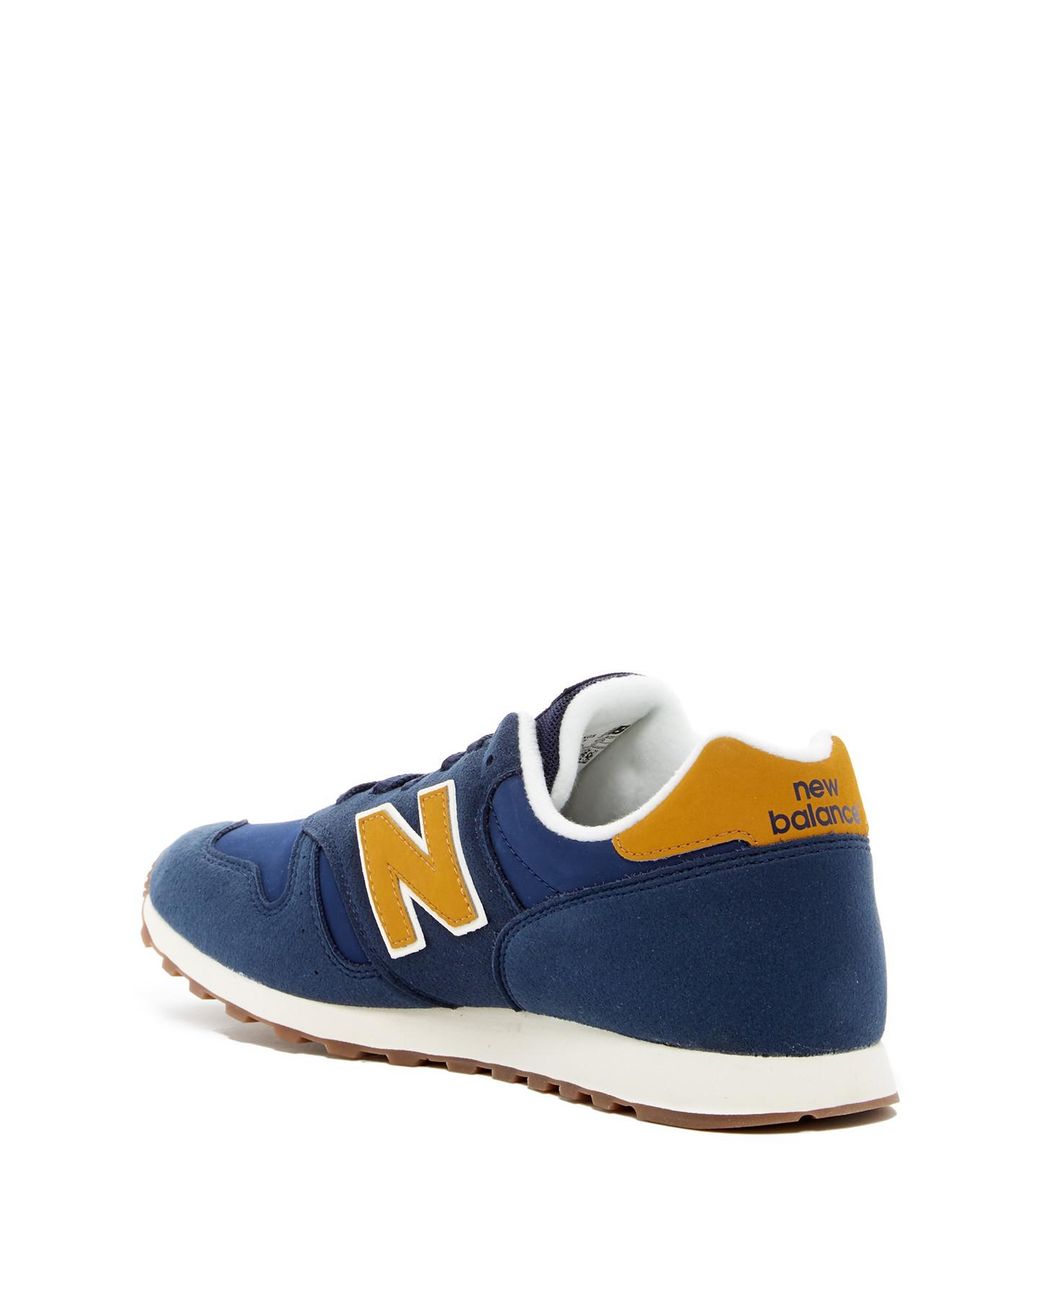 New Balance Ml373 Classic Sneaker - Wide Width Available in Blue-Yellow  (Blue) for Men | Lyst